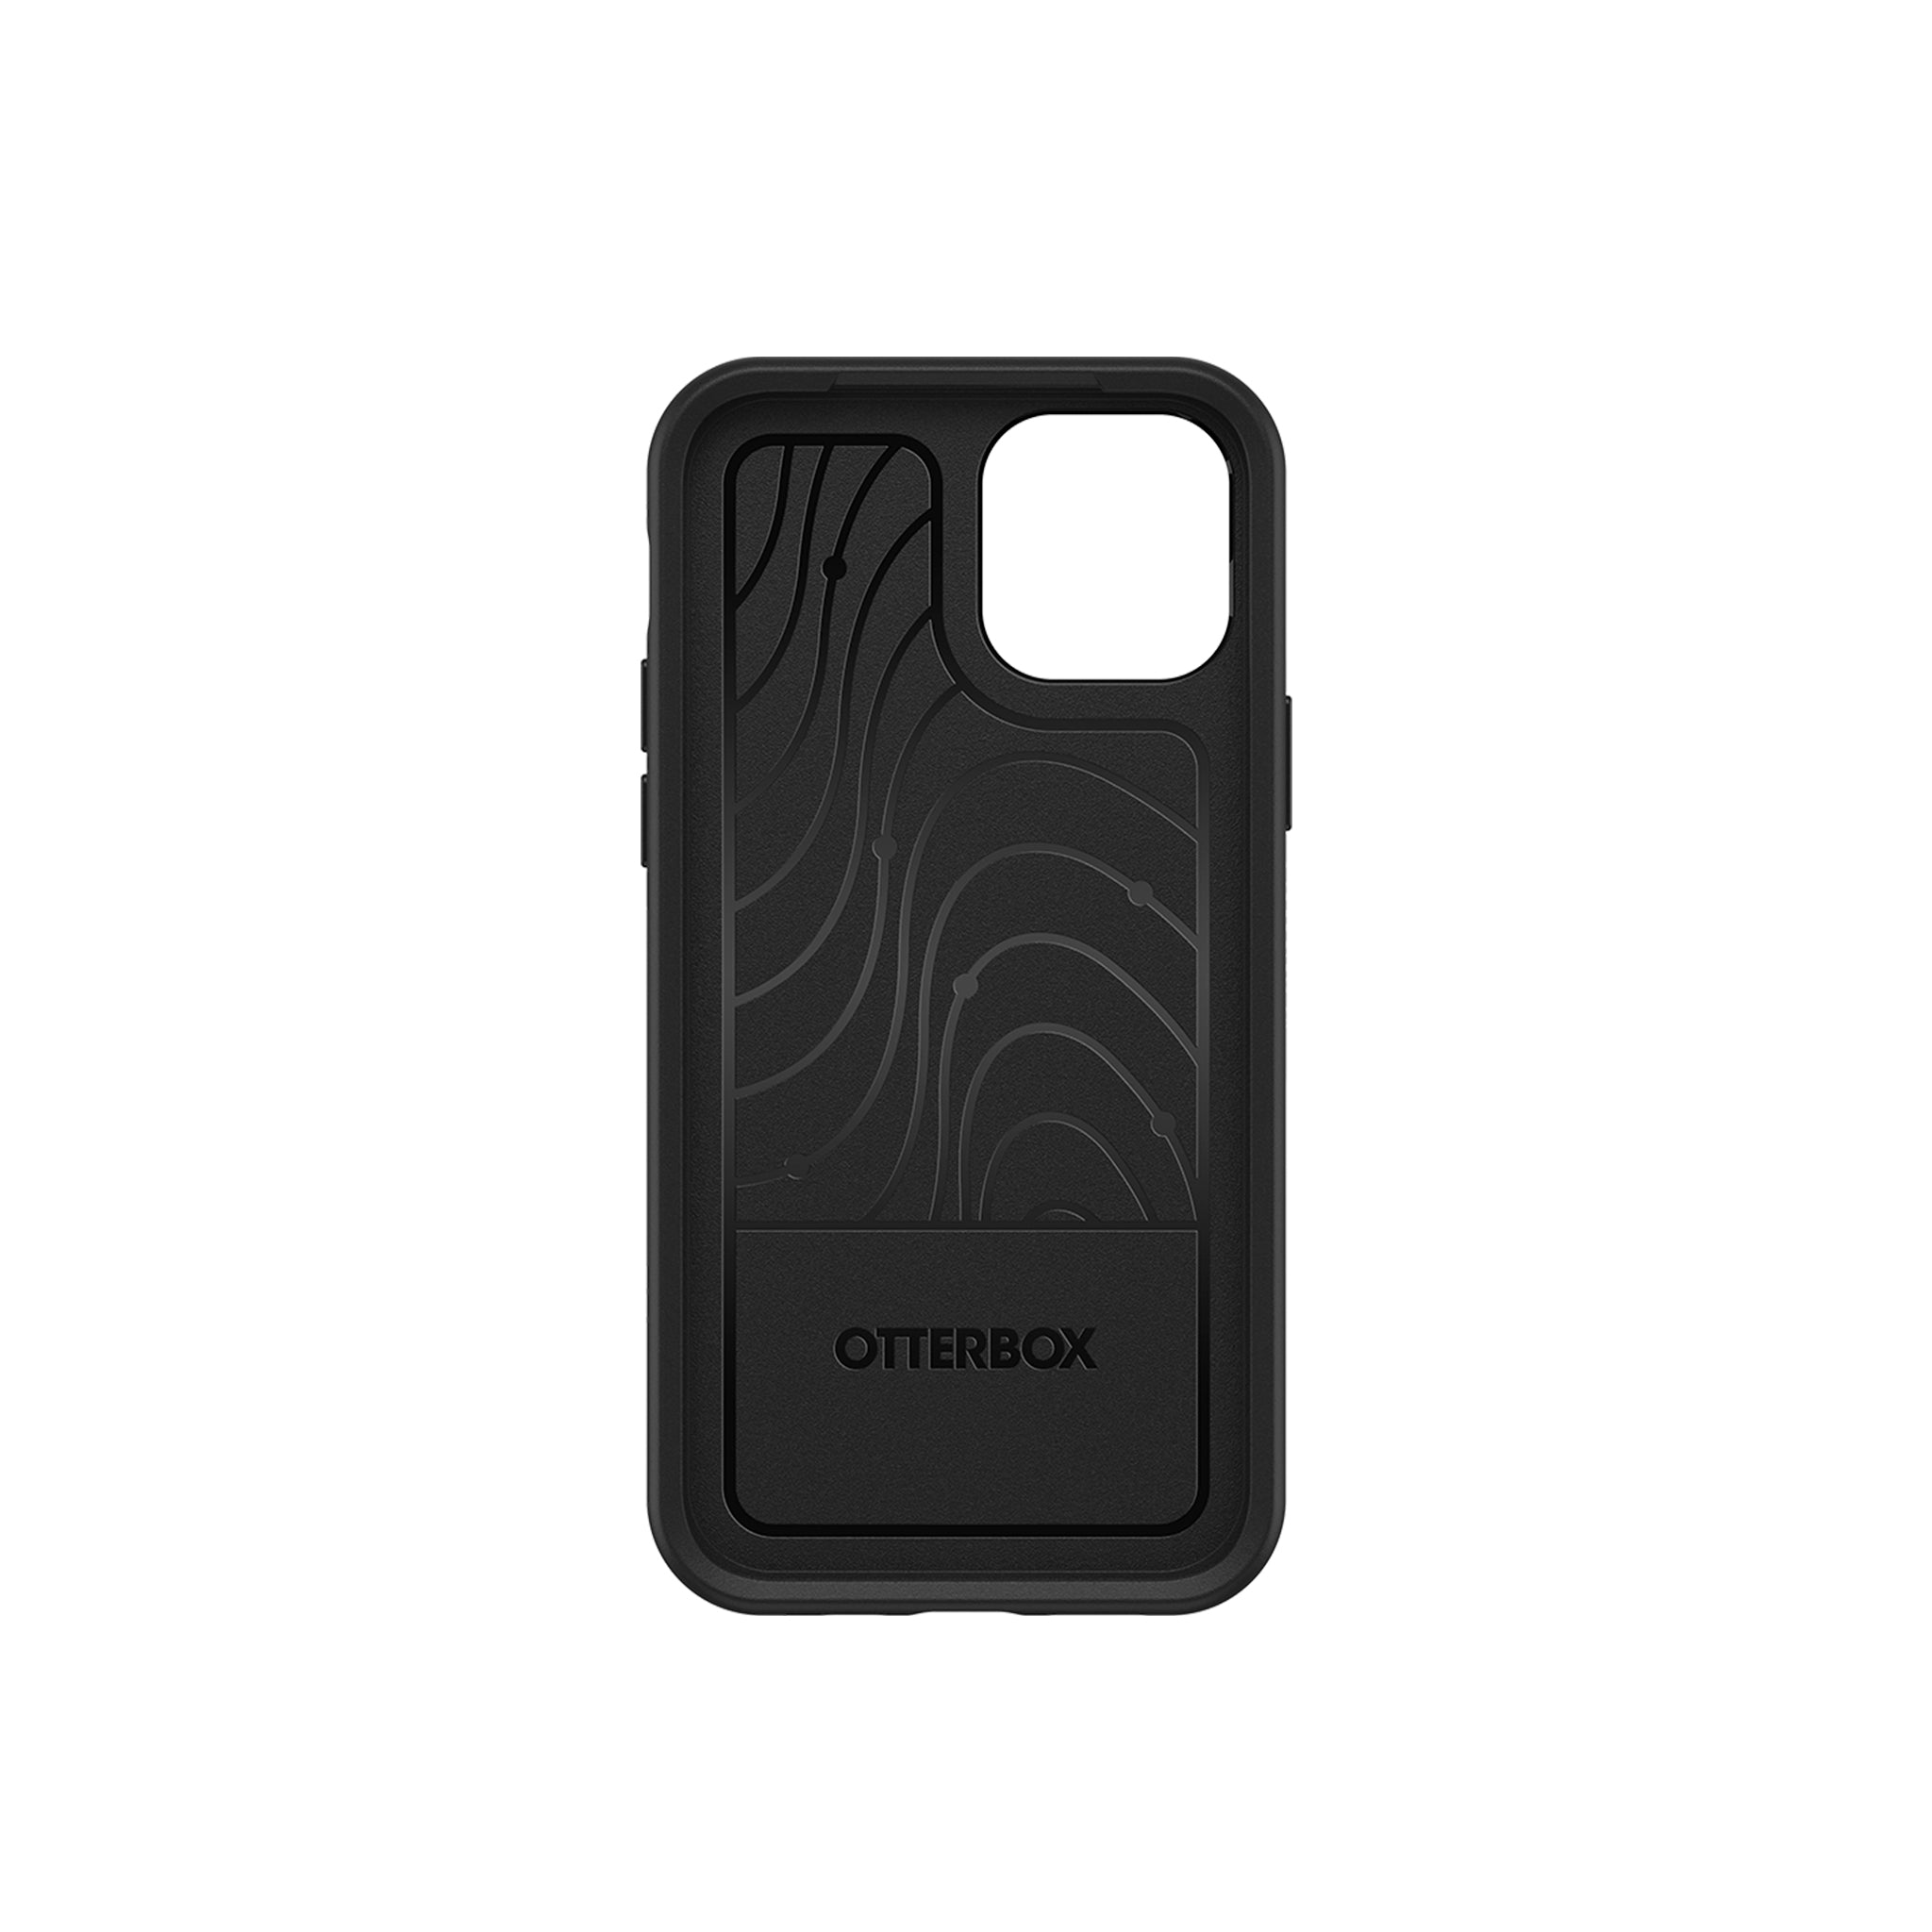 OtterBox - Symmetry for iPhone 12 / 12 Pro - Enigma